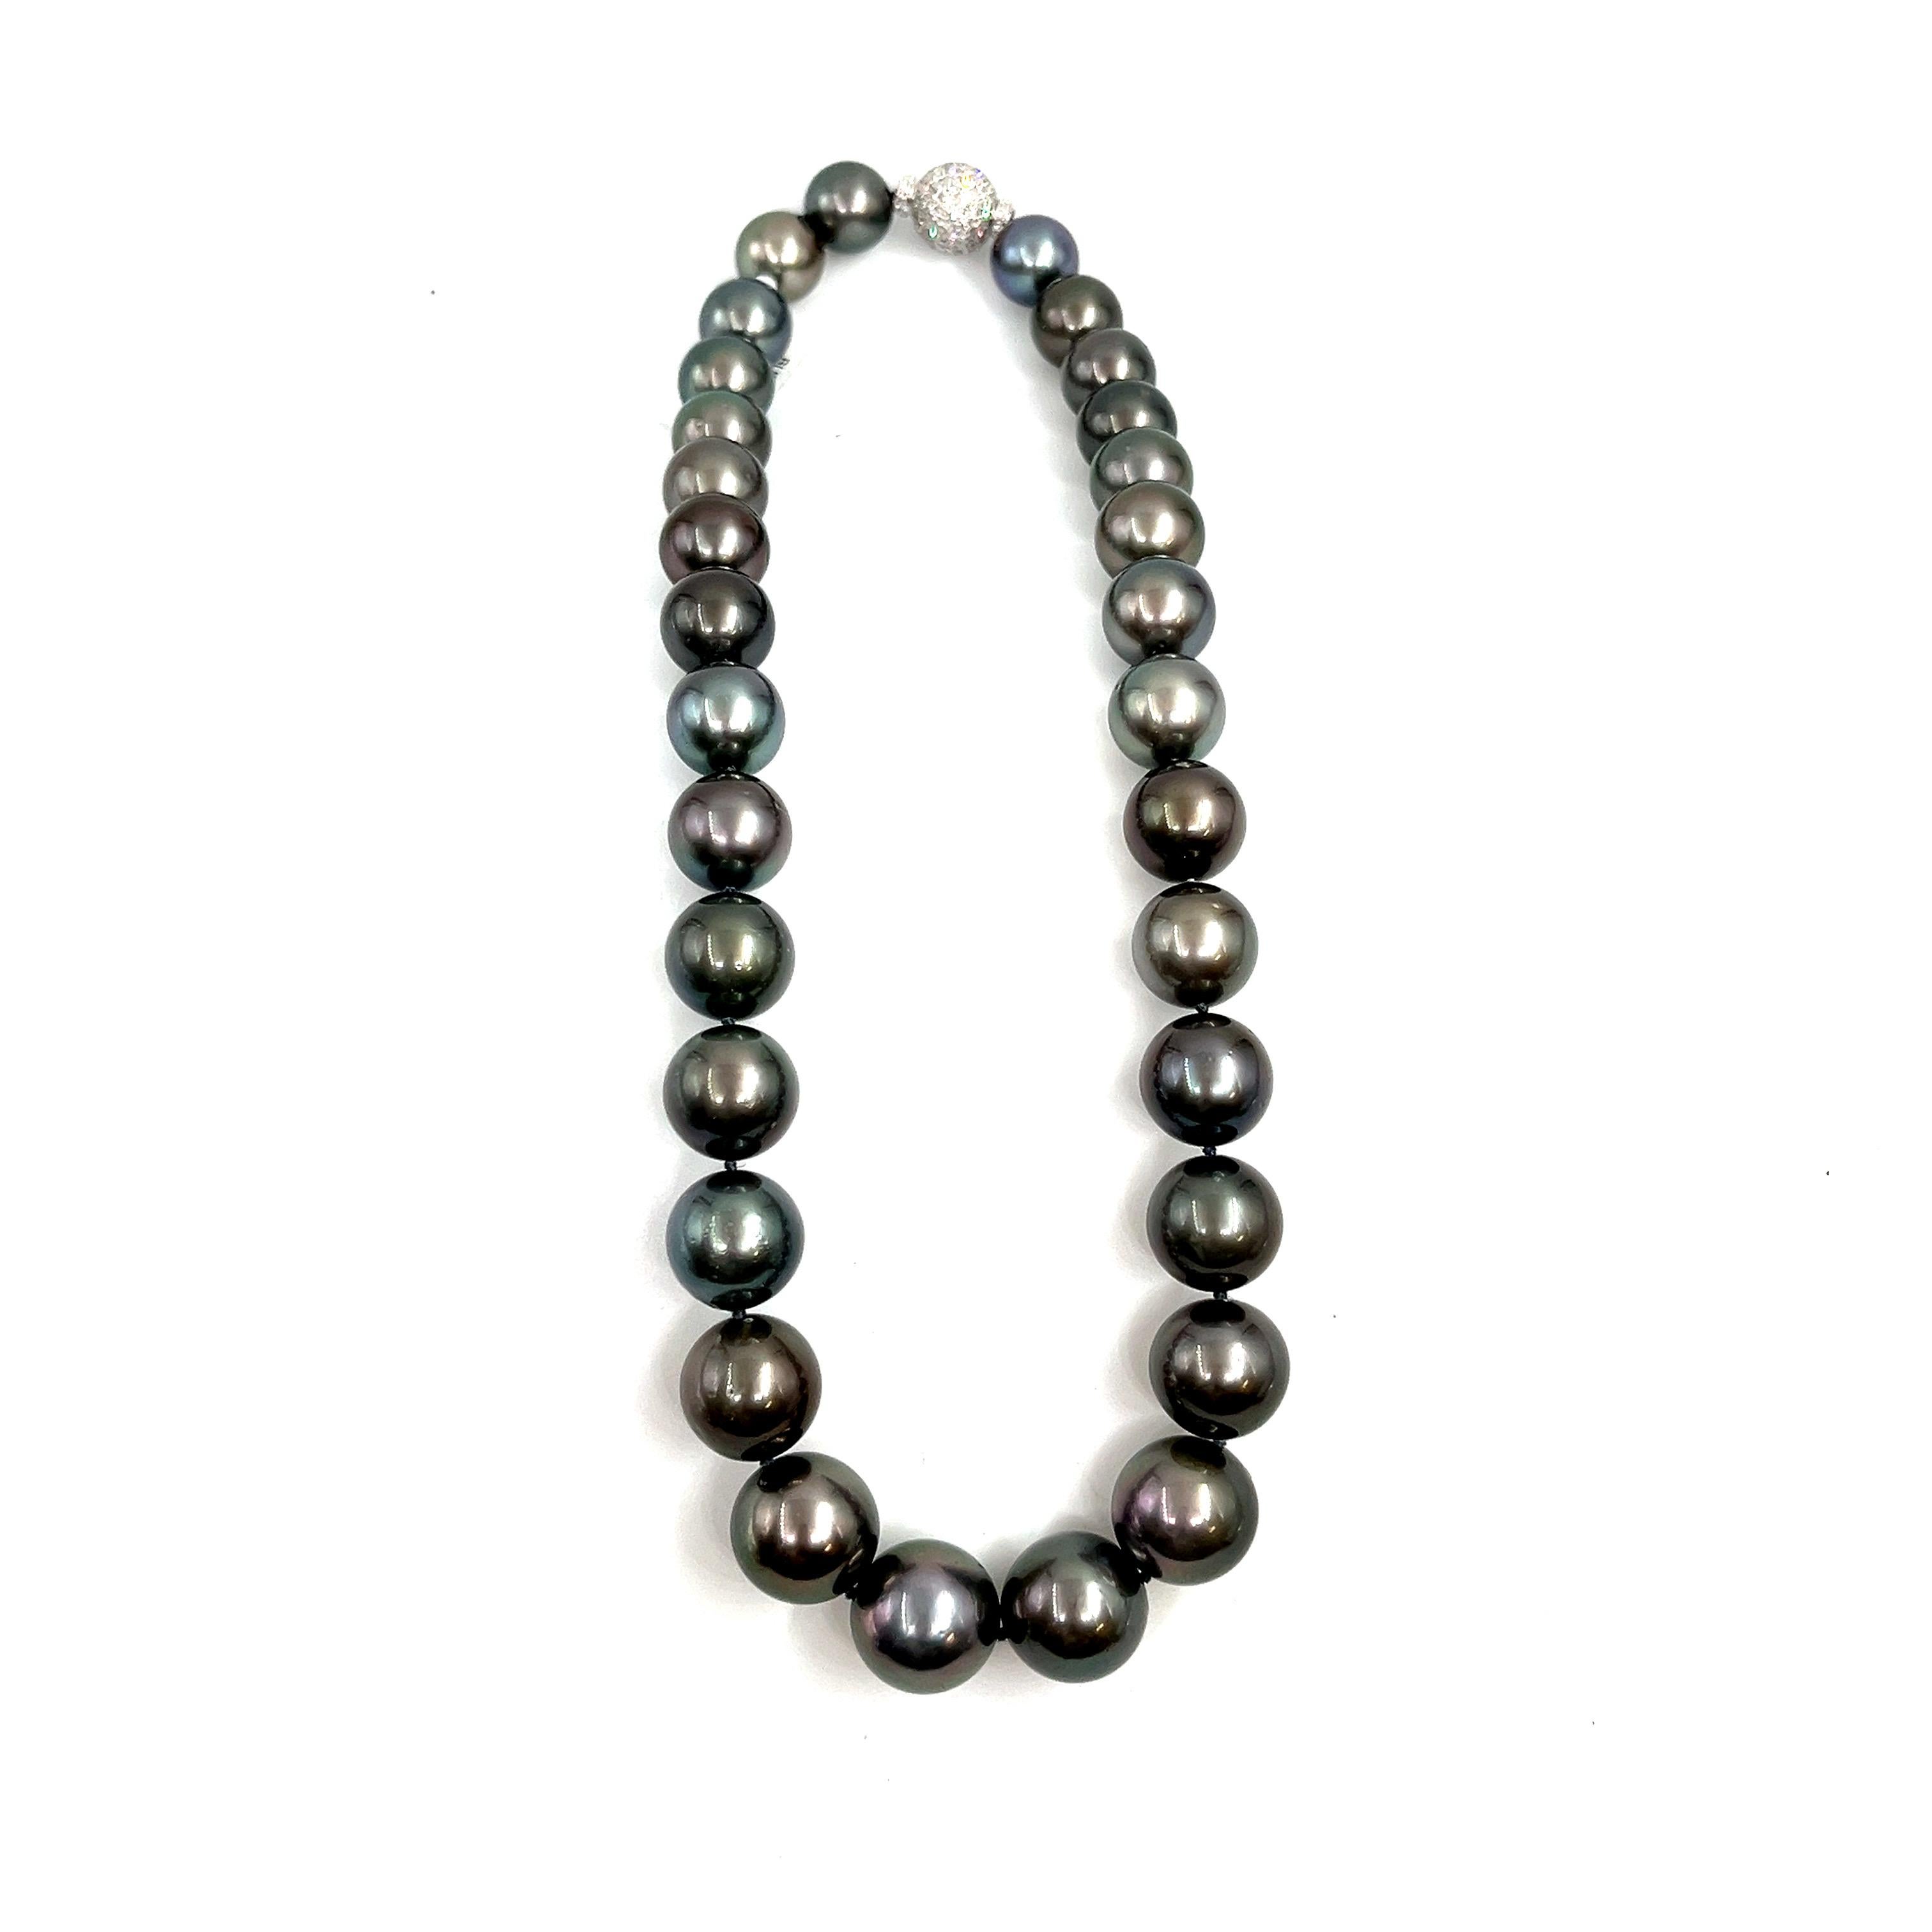 This beautiful and elegant natural Tahitian black pearl necklace features 99 diamonds weighing 2.83 ct set in 18k white gold. The pearls are between 12 mm and 15.80 mm thick. A stunning piece to add to any wardrobe. 